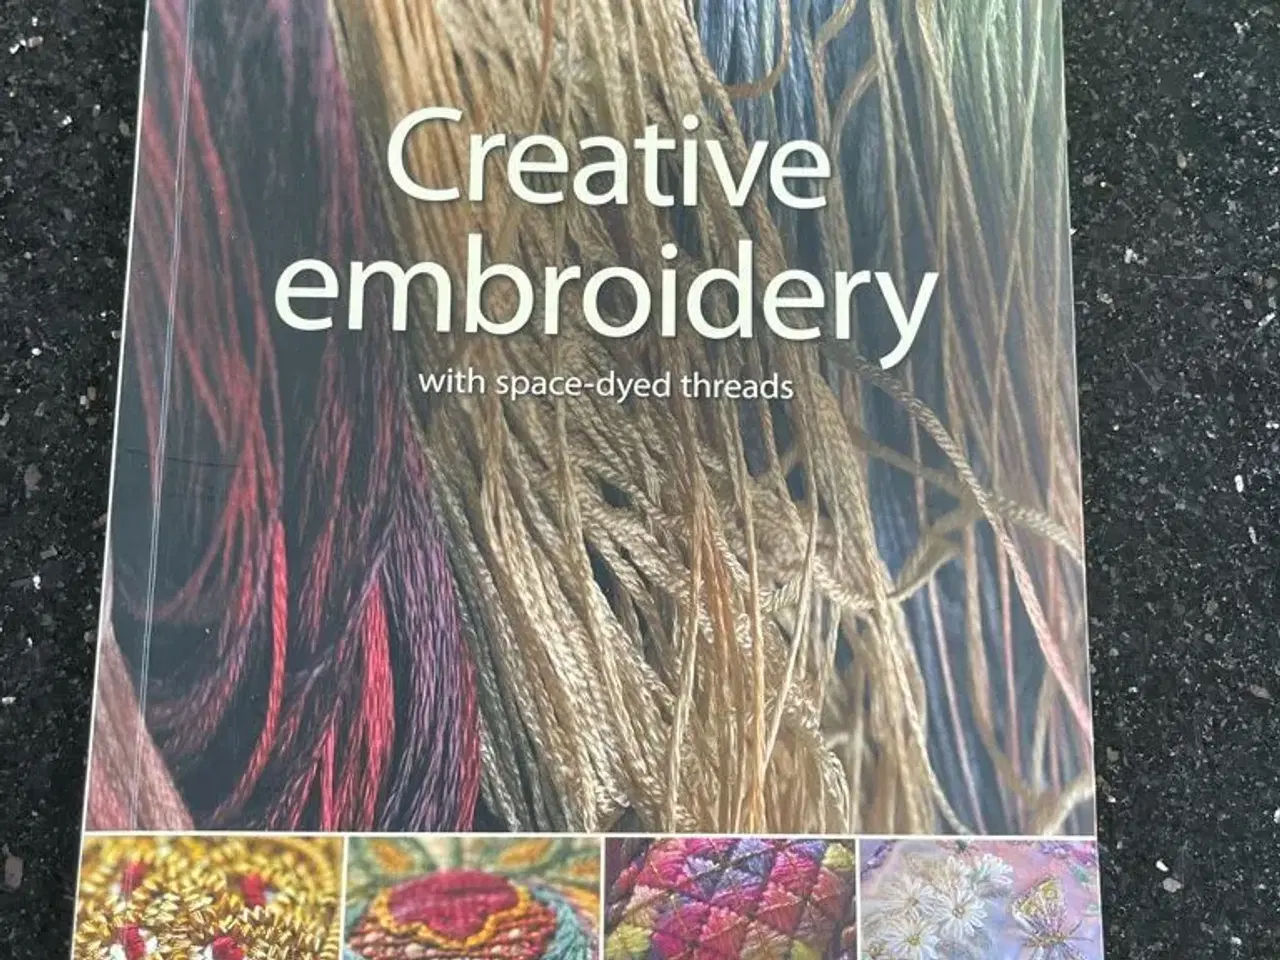 Billede 1 - Creative Embroidery - via Laurie